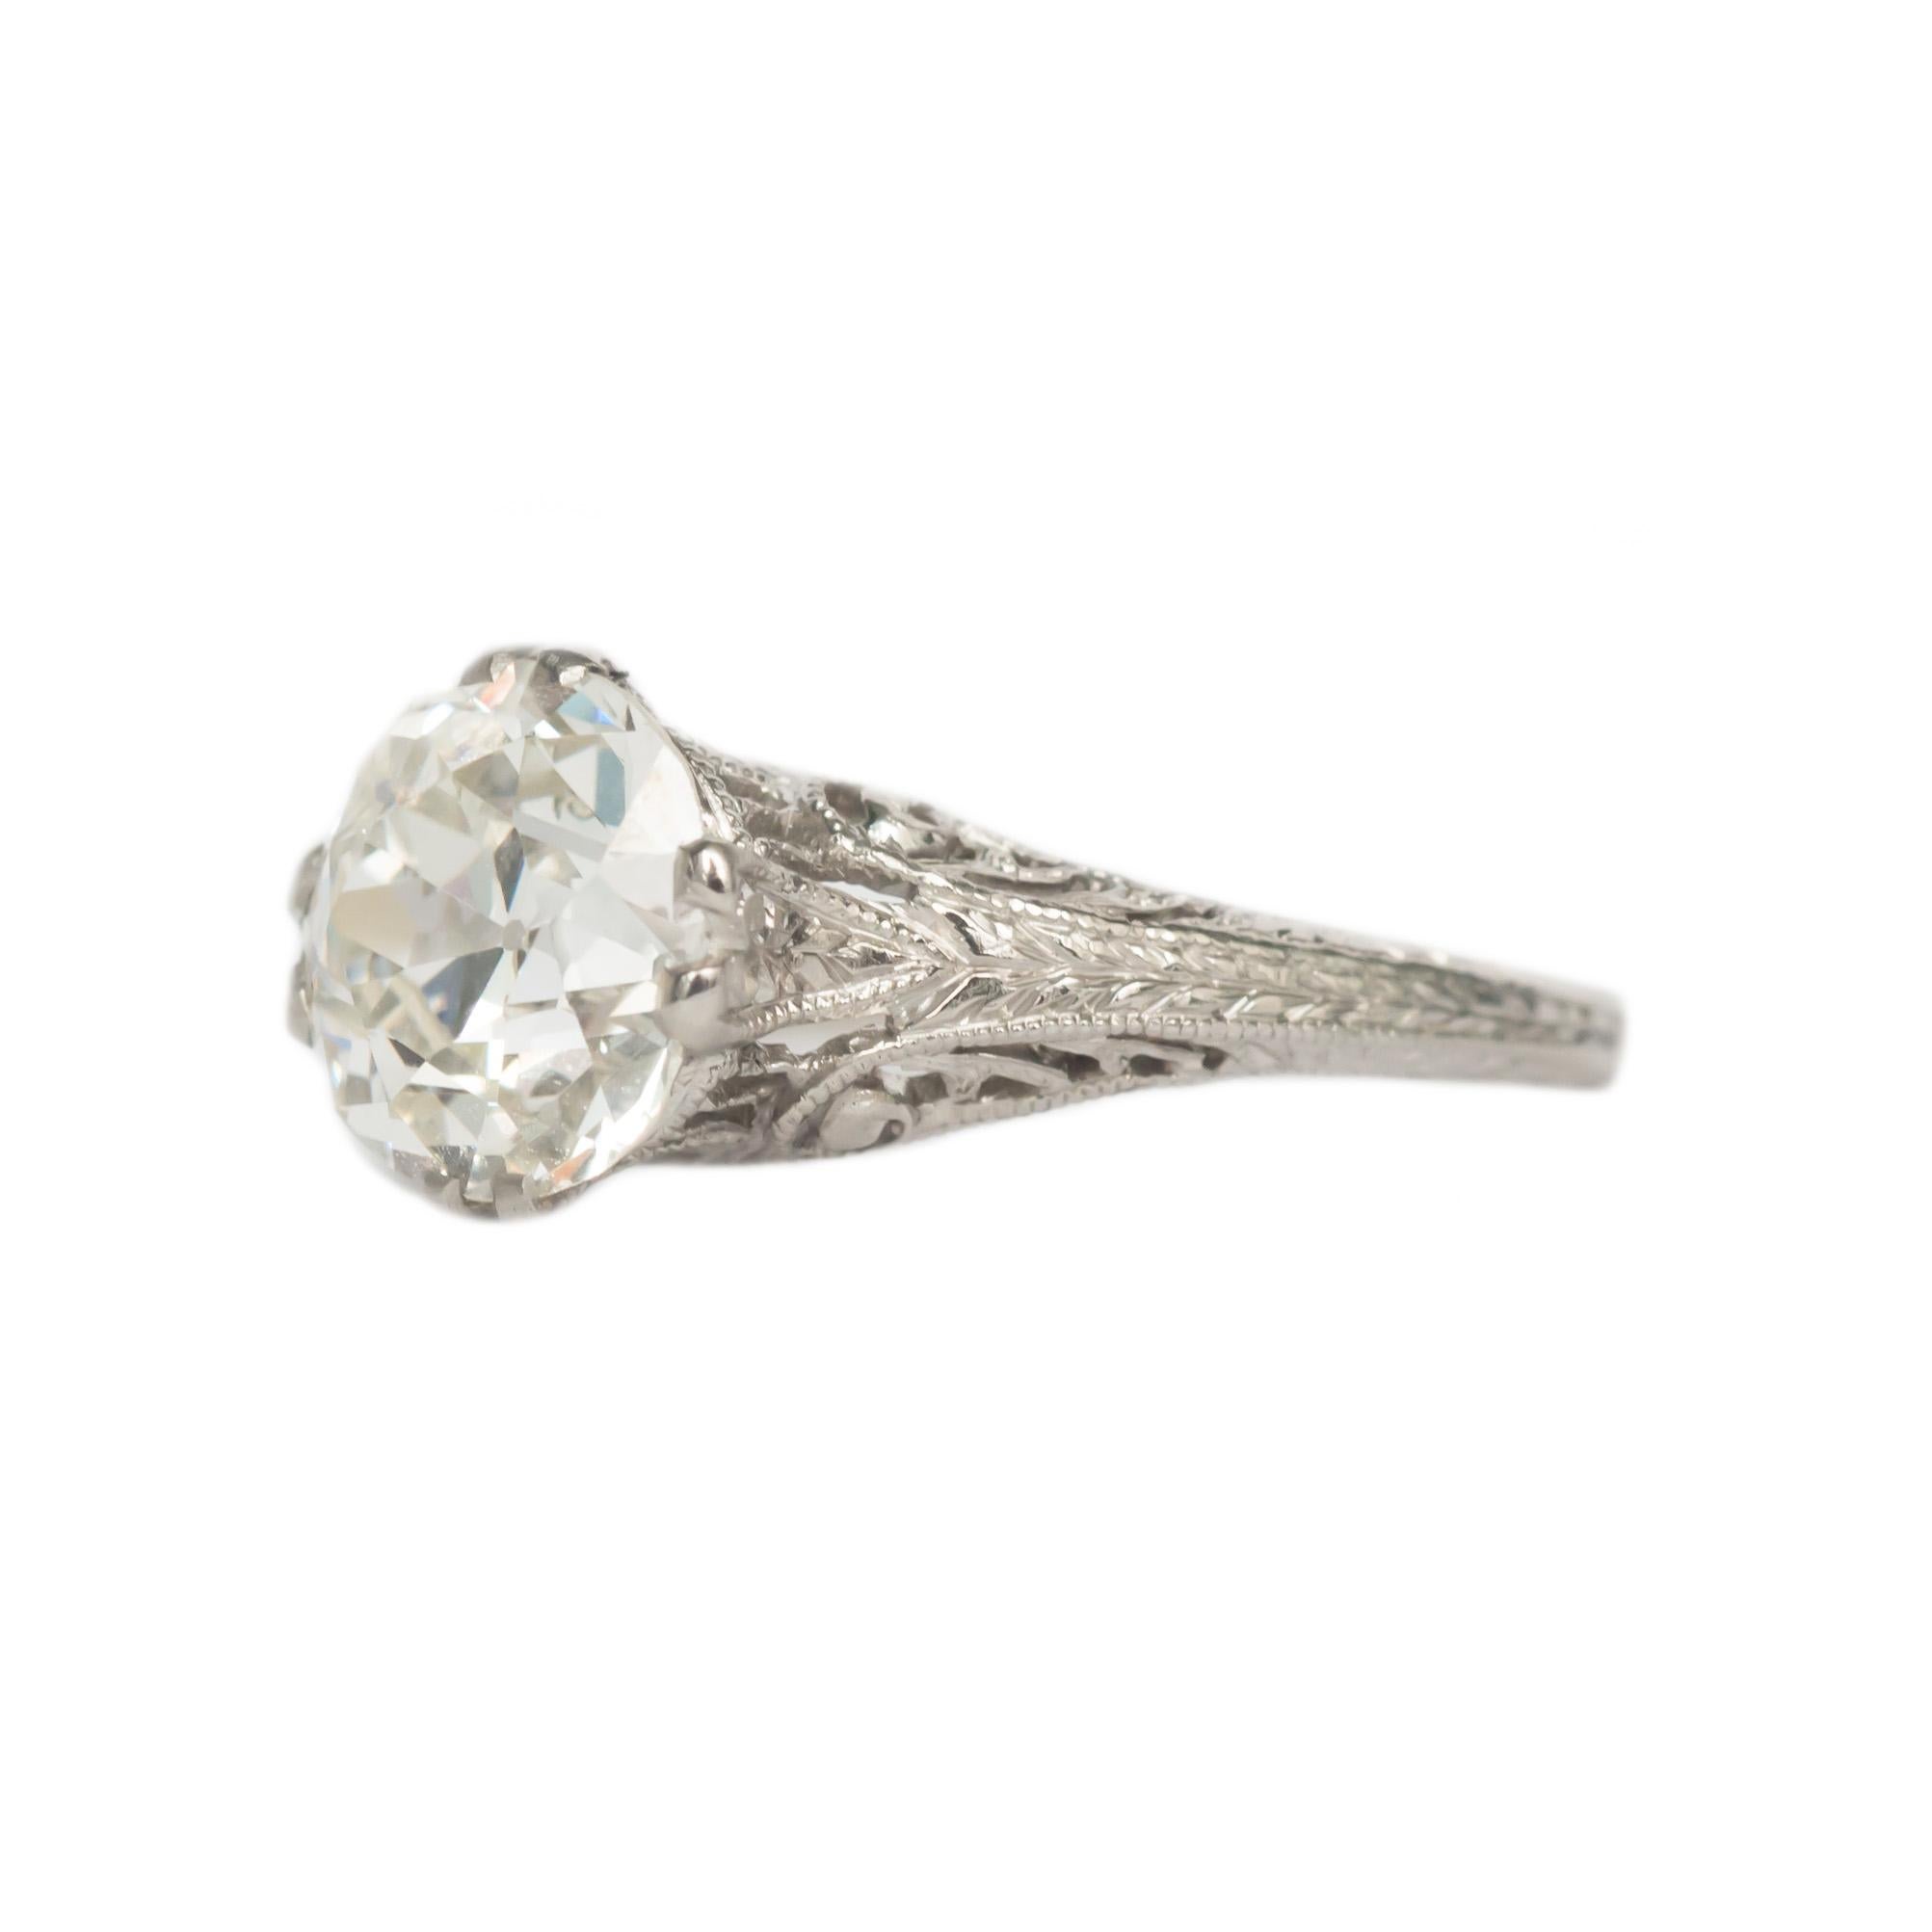 Ring Size: 4.25
Metal Type: Platinum  [Hallmarked, and Tested]
Weight: 2.8 grams

Center Diamond Details:
GIA REPORT #2205738437 
Weight: 1.64 carat
Cut: Antique Cushion
Color: J 
Clarity: VS1

Finger to Top of Stone Measurement: 5.90mm
Condition: 